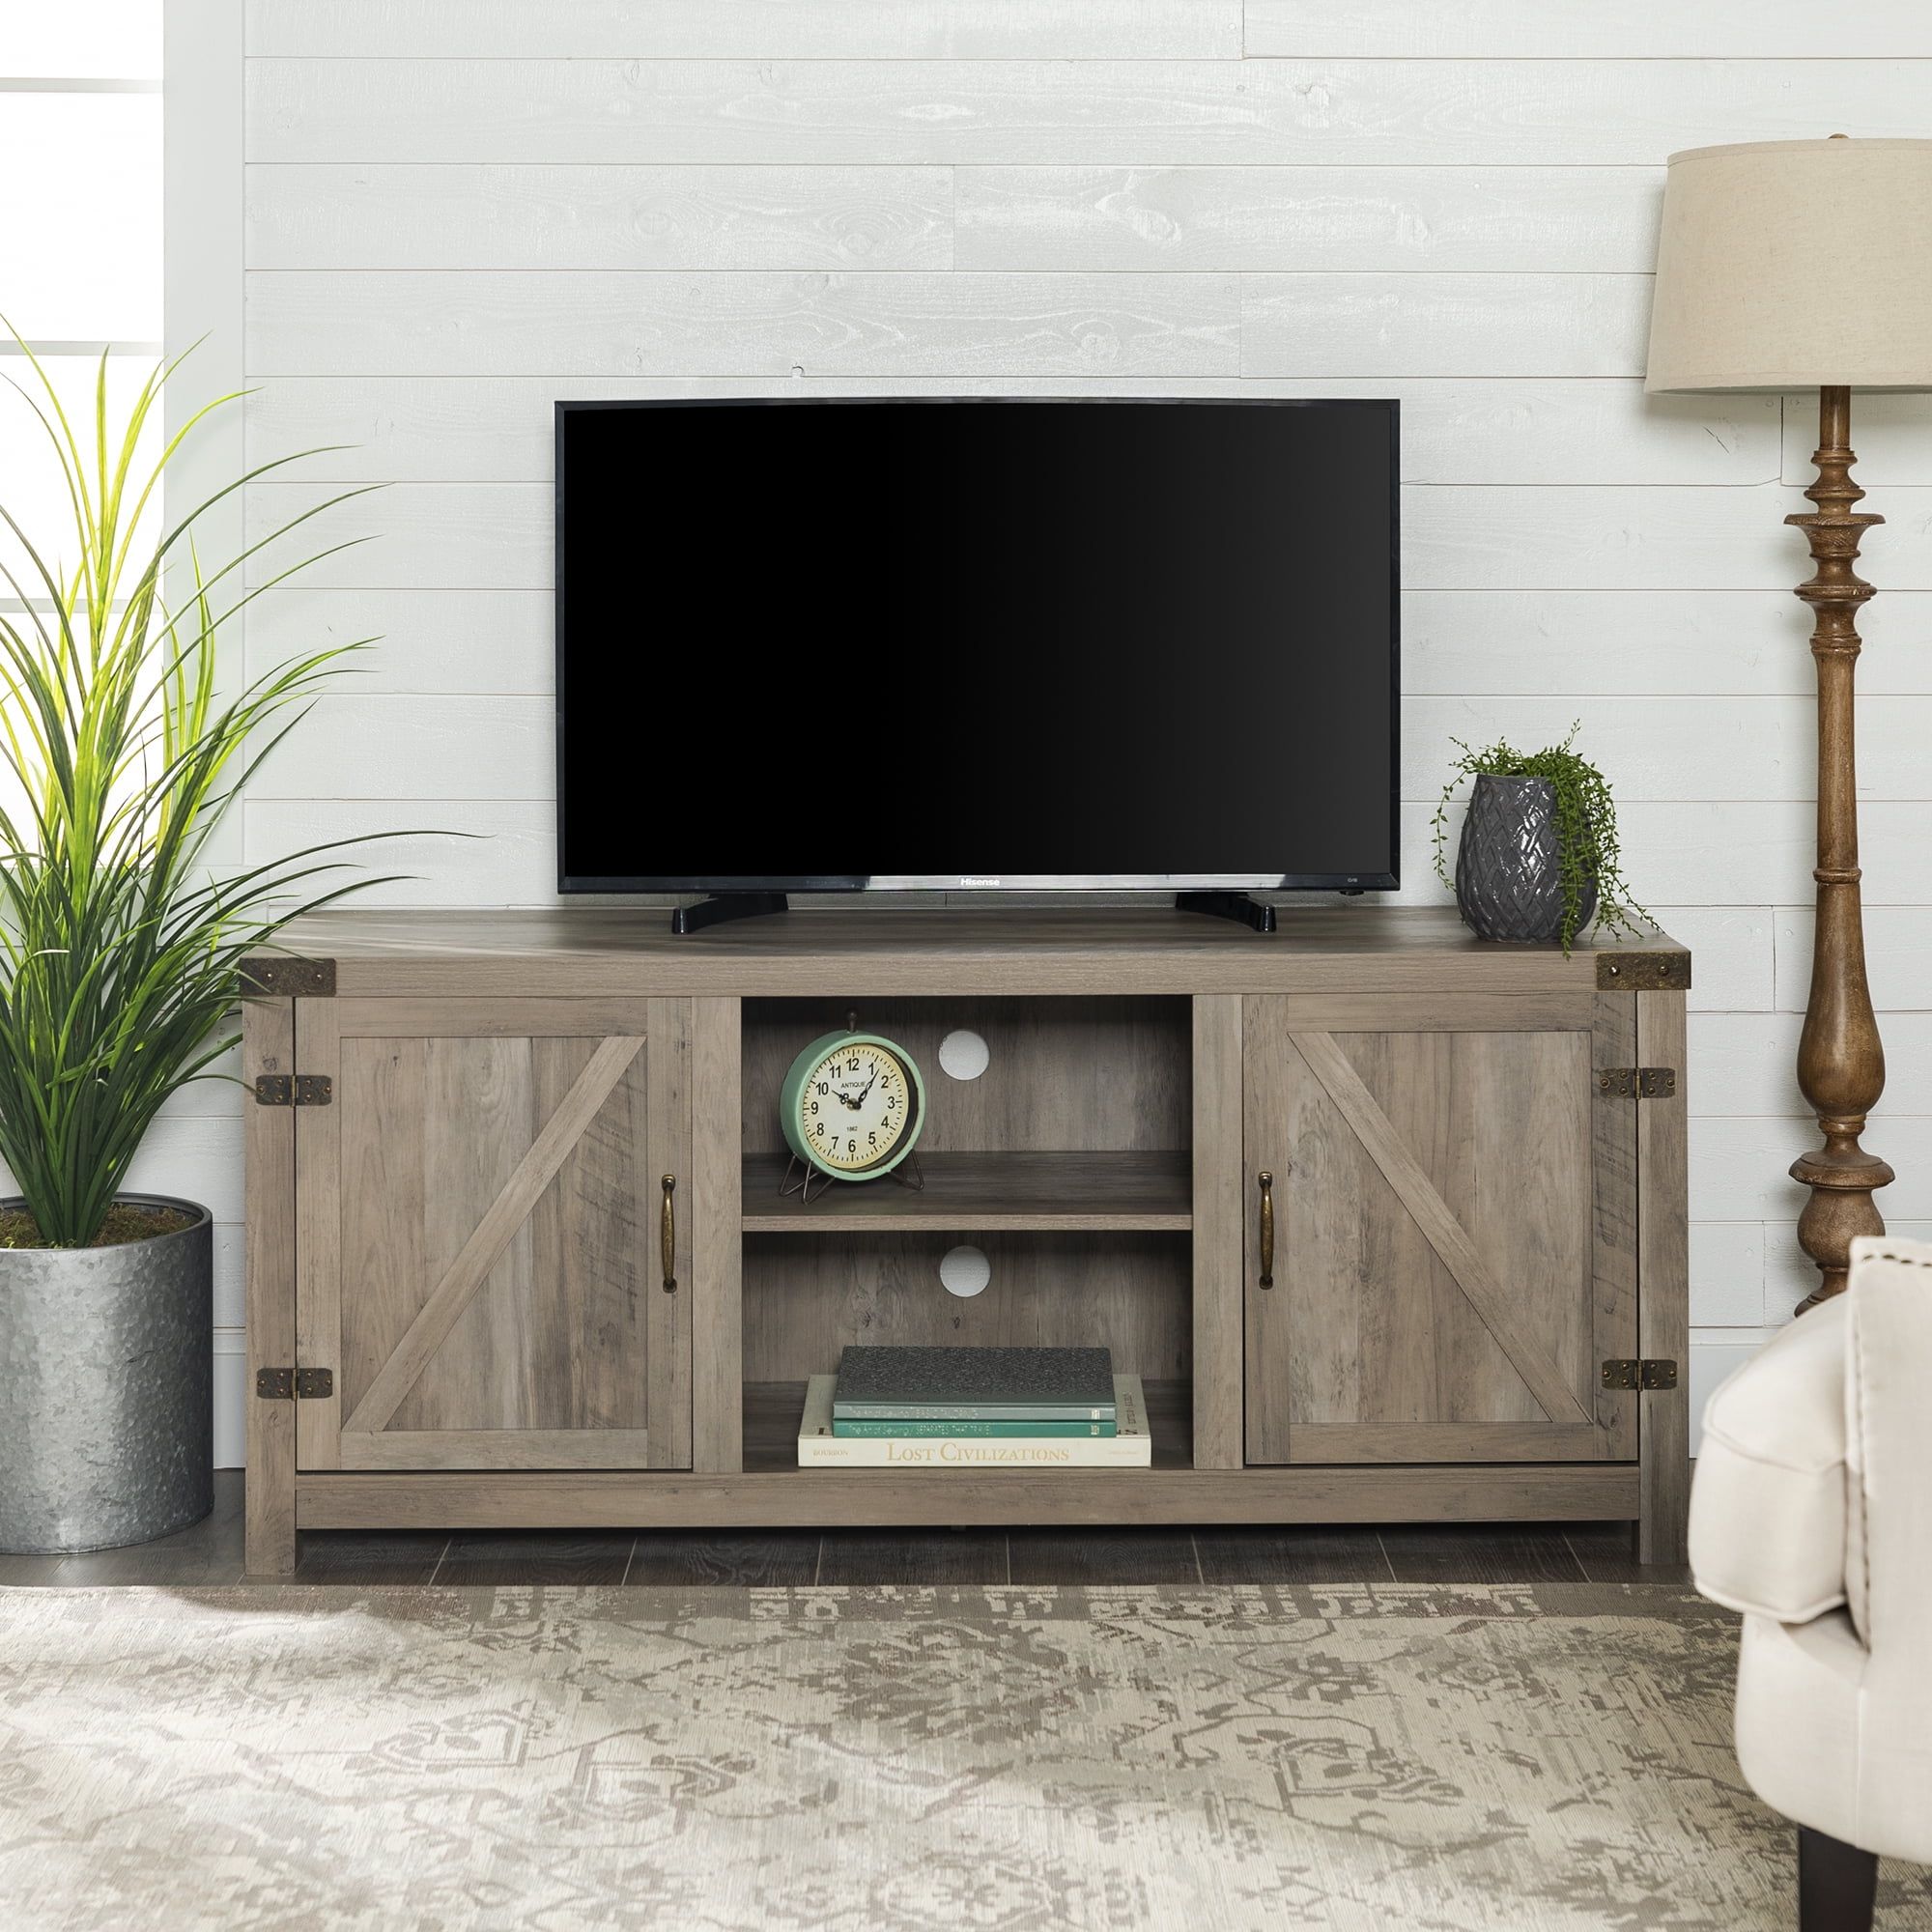 Manor Park Farmhouse Barn Door Tv Stand For Tvs Up To 65", Grey Wash Within Farmhouse Tv Stands (Gallery 7 of 20)